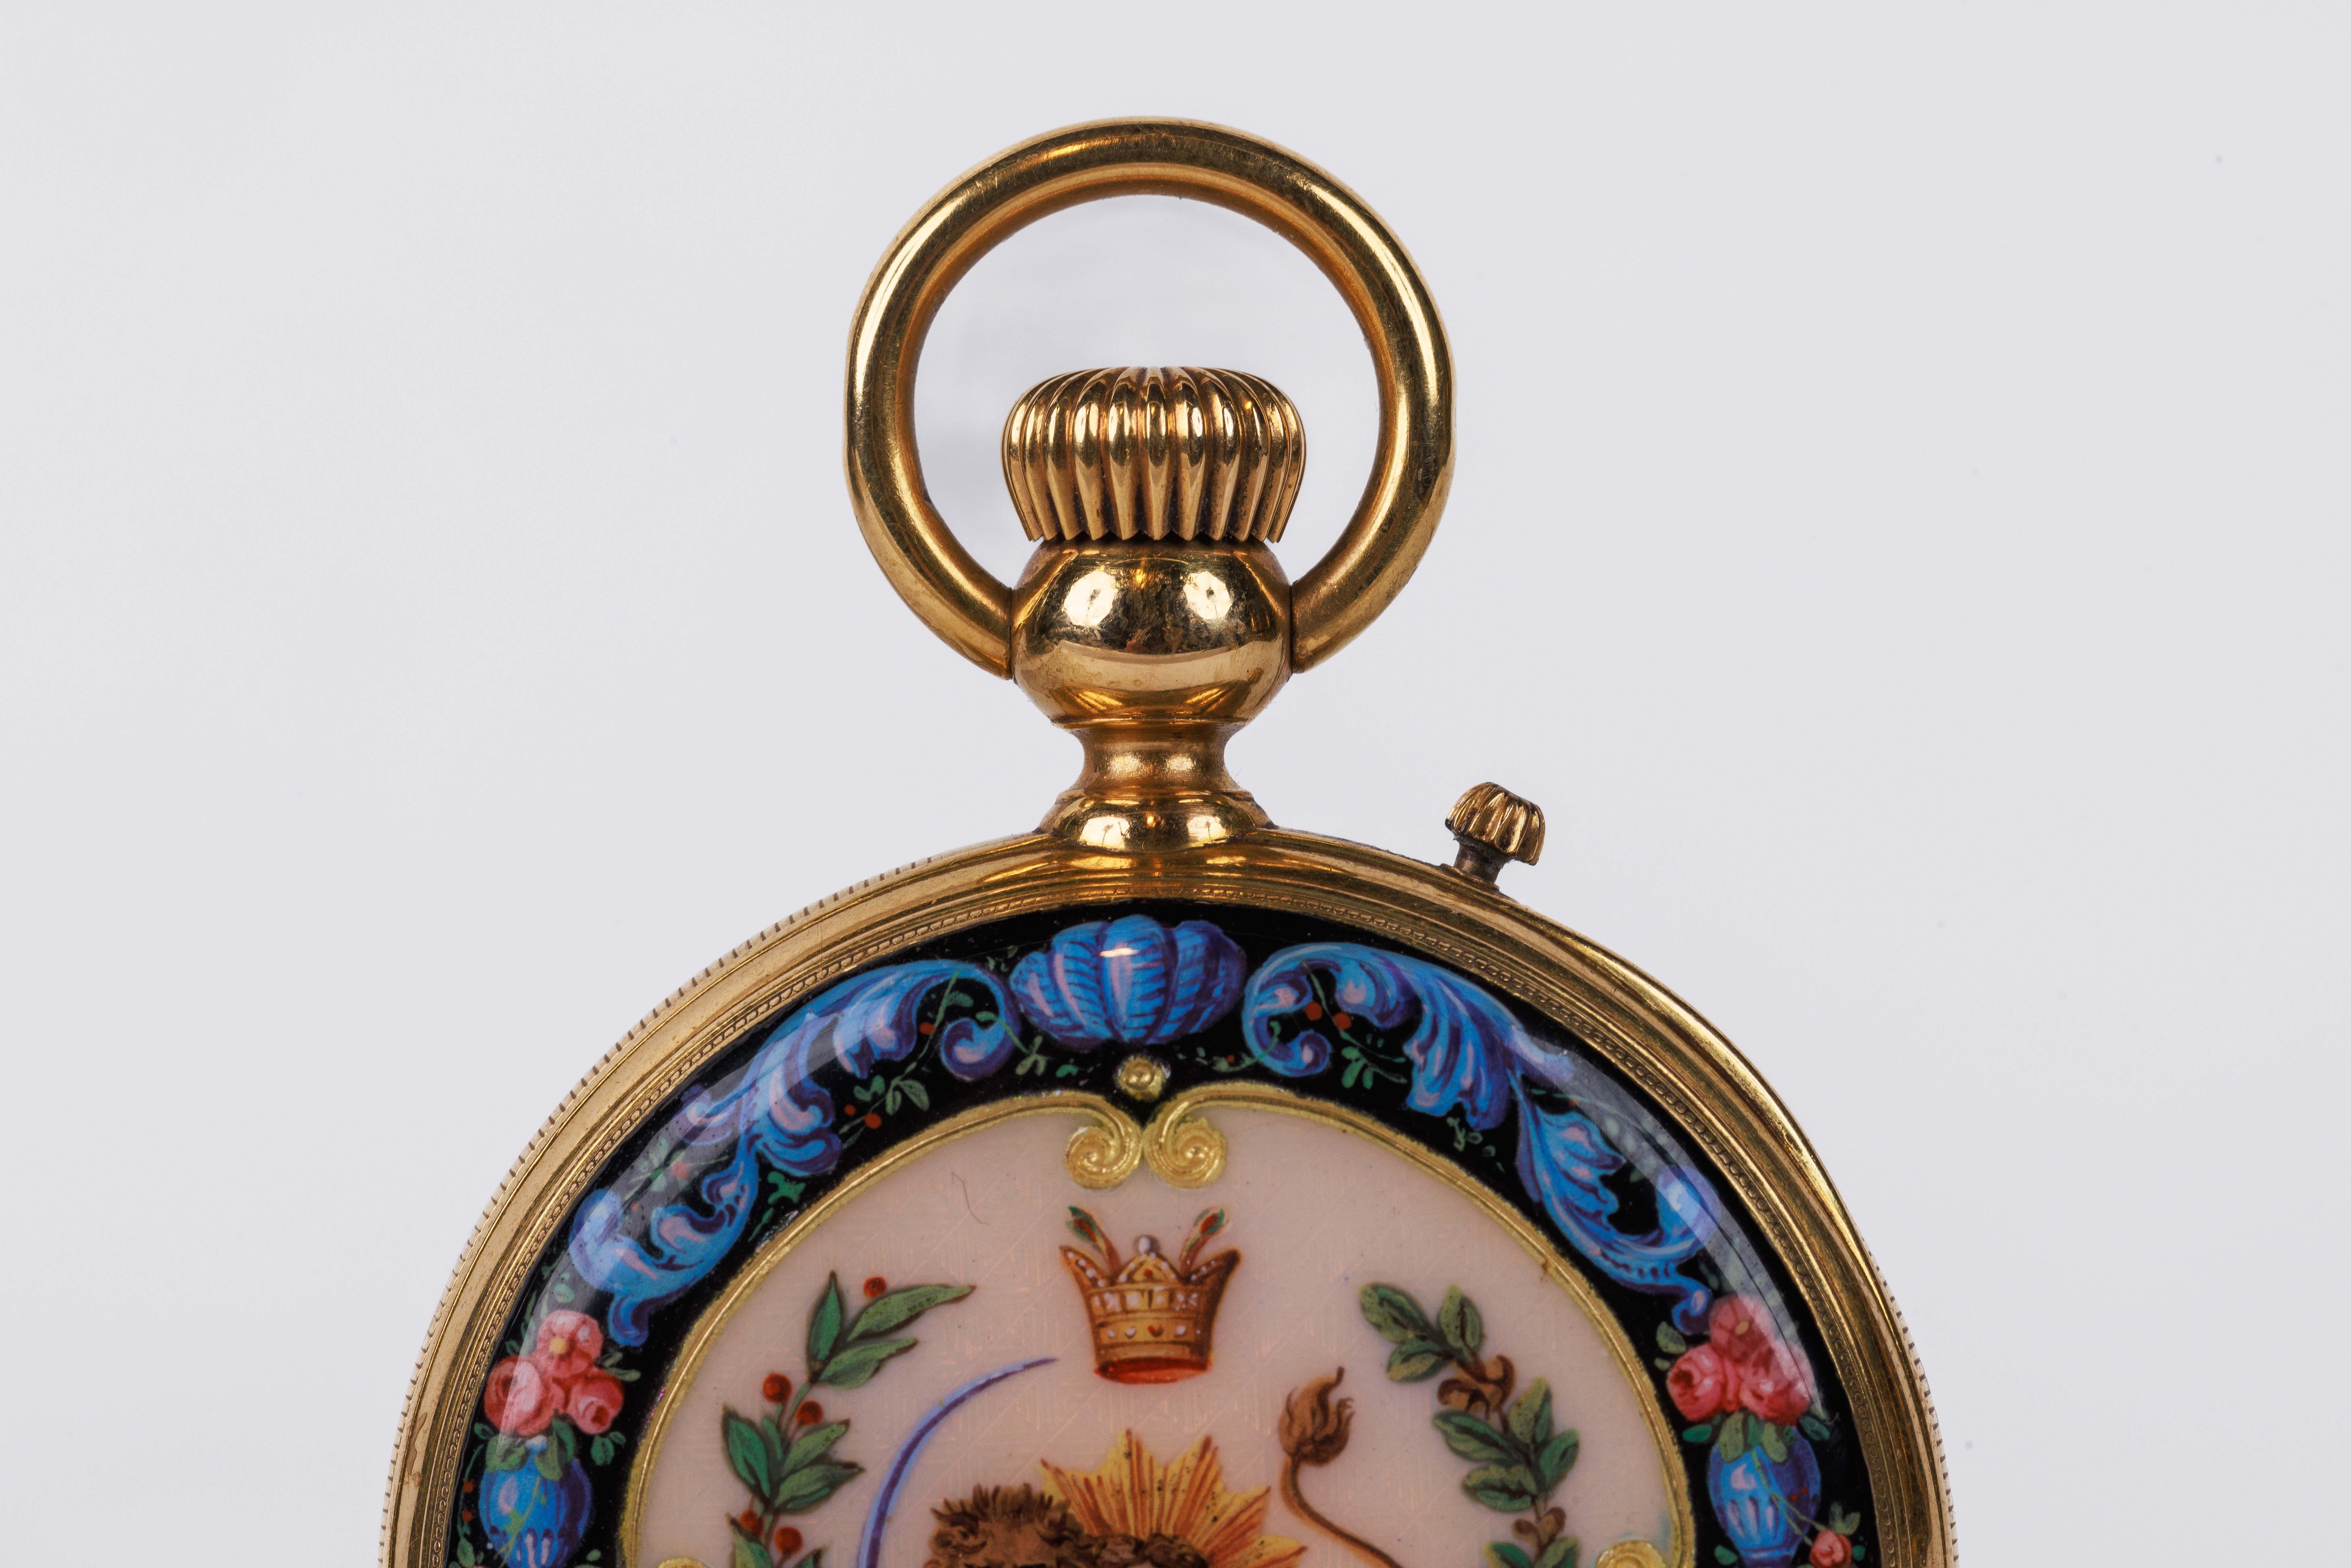 Rare Gold and Enamel Presentation Pocket Watch with Portrait of Naser Shah For Sale 5